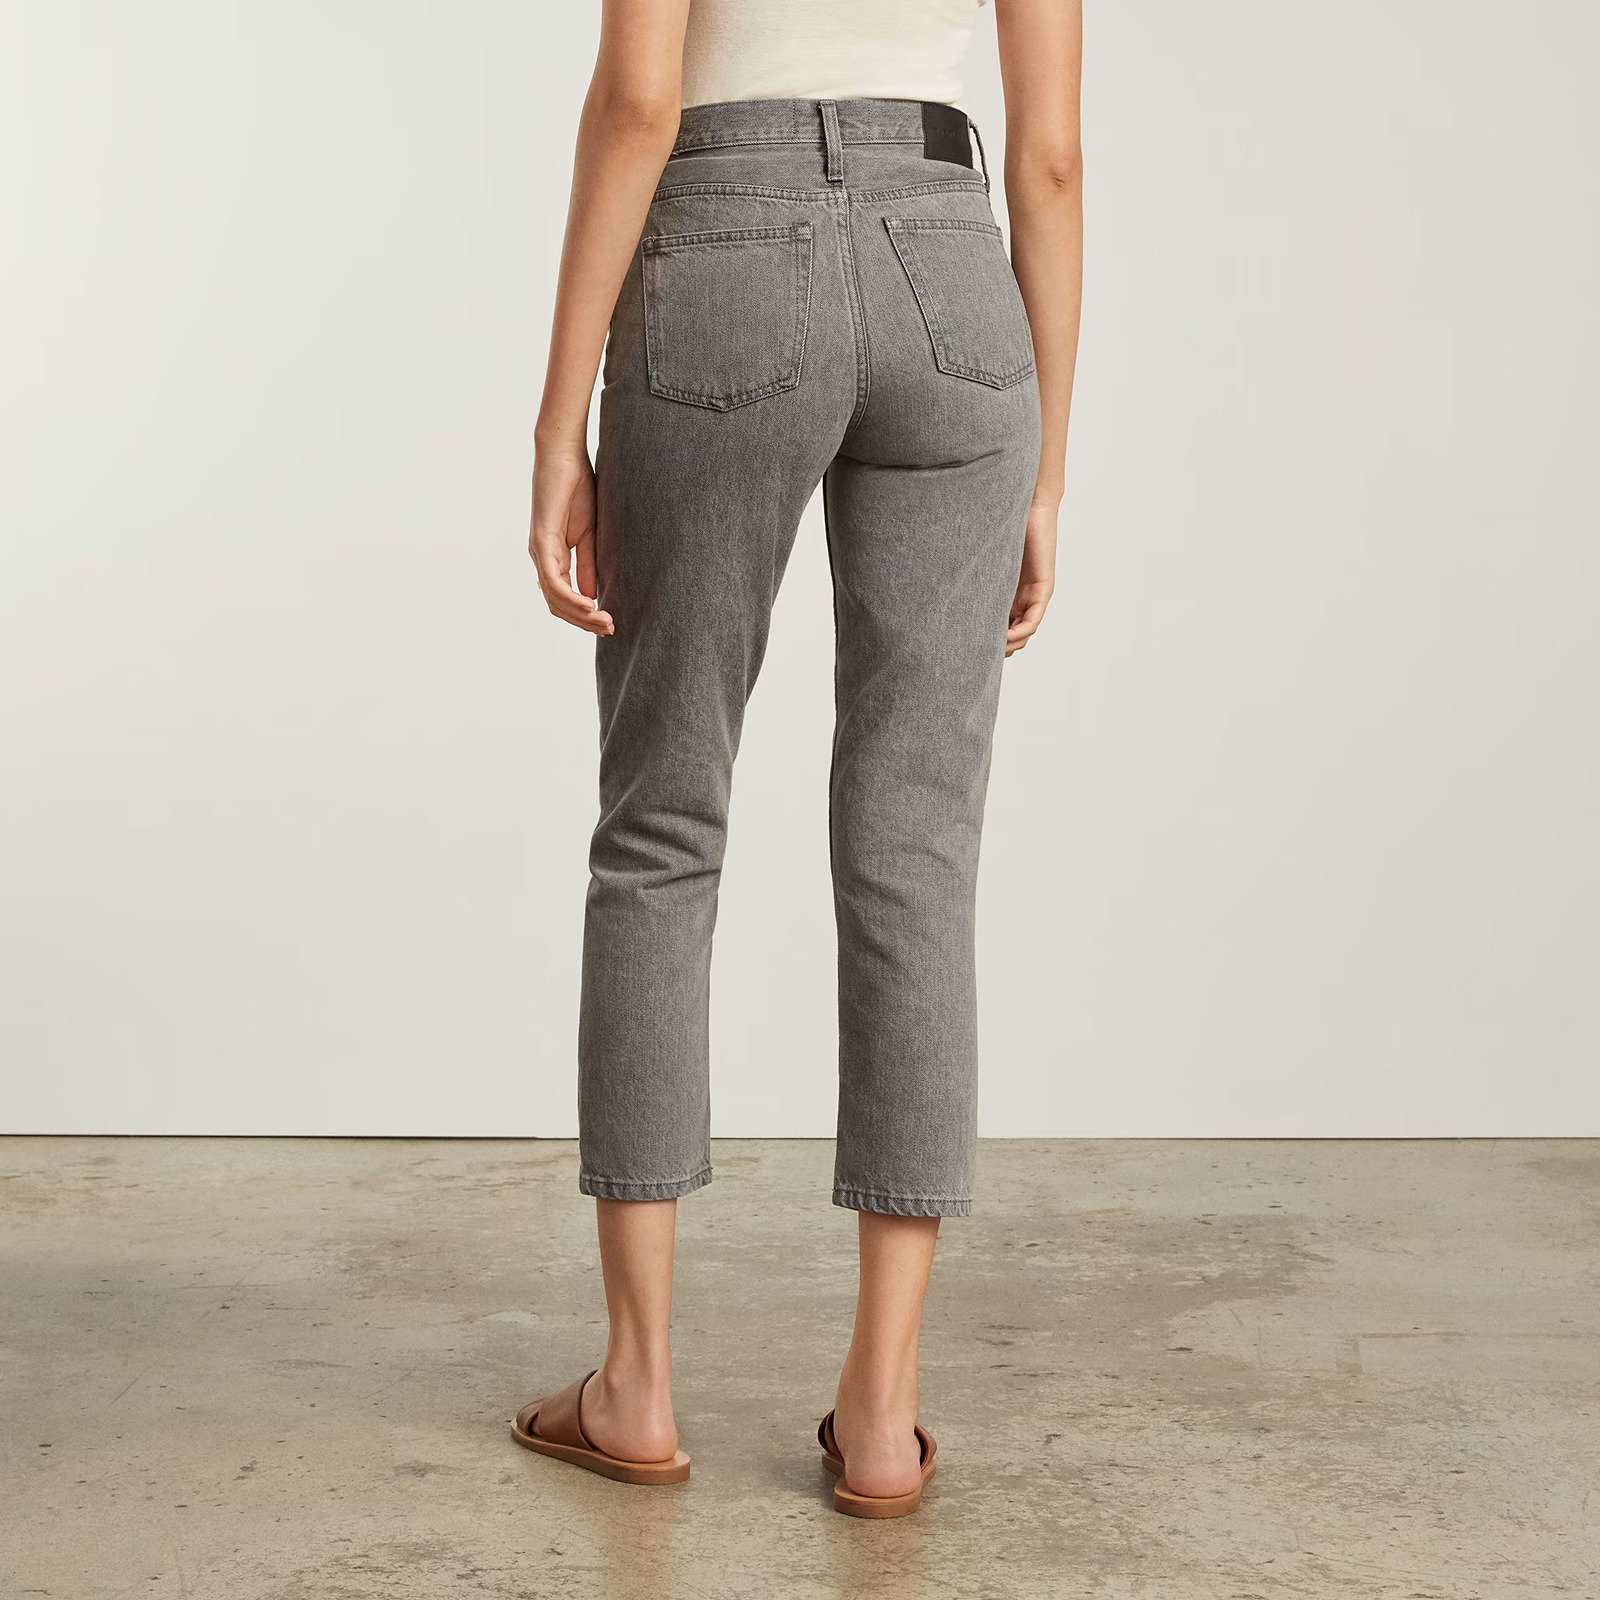 Popular Everlane The 90´s Cheeky Crop Jeans Button-fly Organic Cotton Acid Grey Womens 2 PaQ4OQ0vL on sale